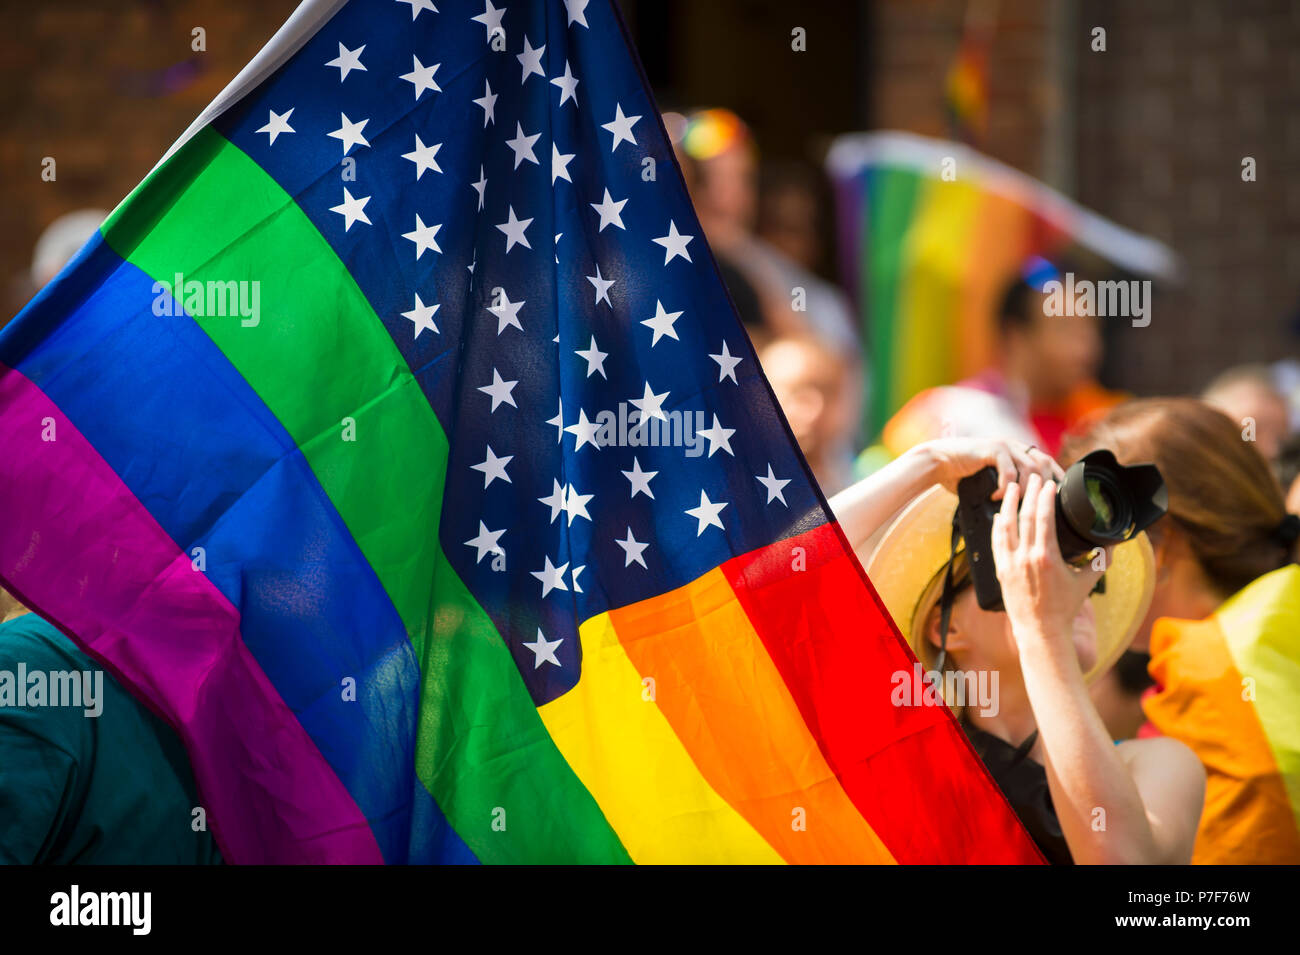 American flag with stars and gay pride rainbow stripes being waved at the annual Gay Pride Parade in Greenwich Village, NYC Stock Photo